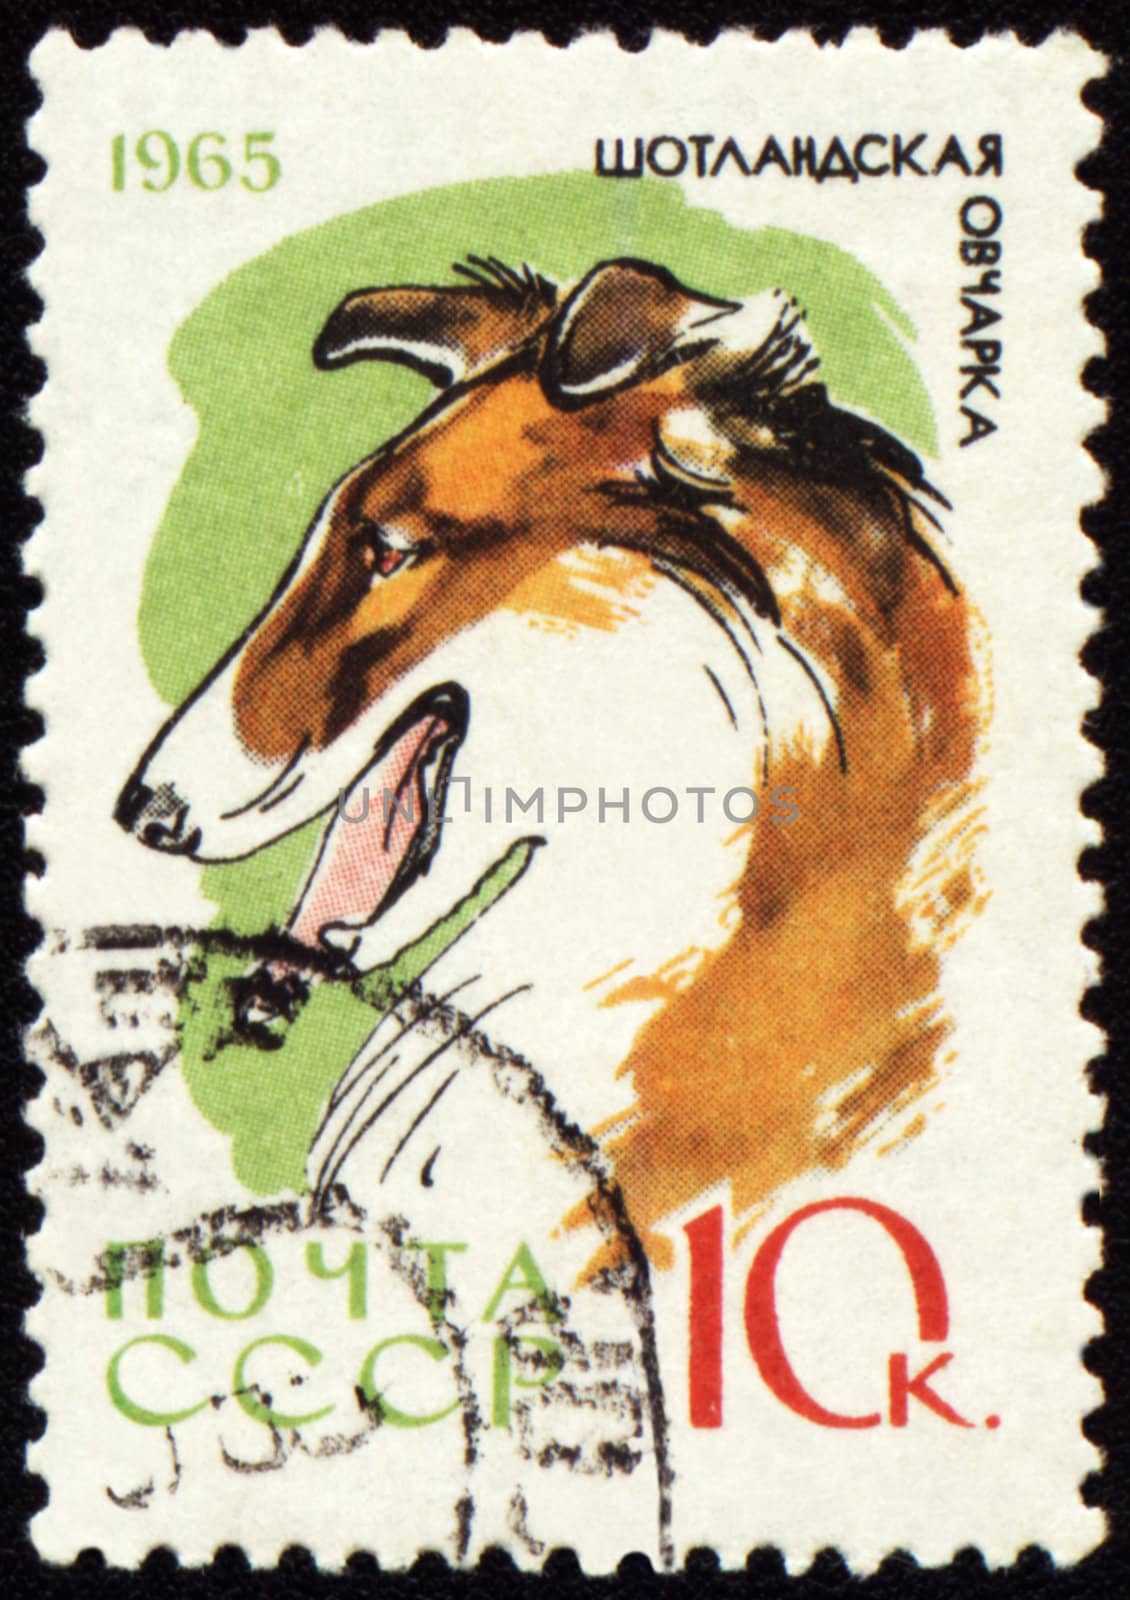 USSR - CIRCA 1965: stamp printed in USSR shows colly, series "Dogs", circa 1965